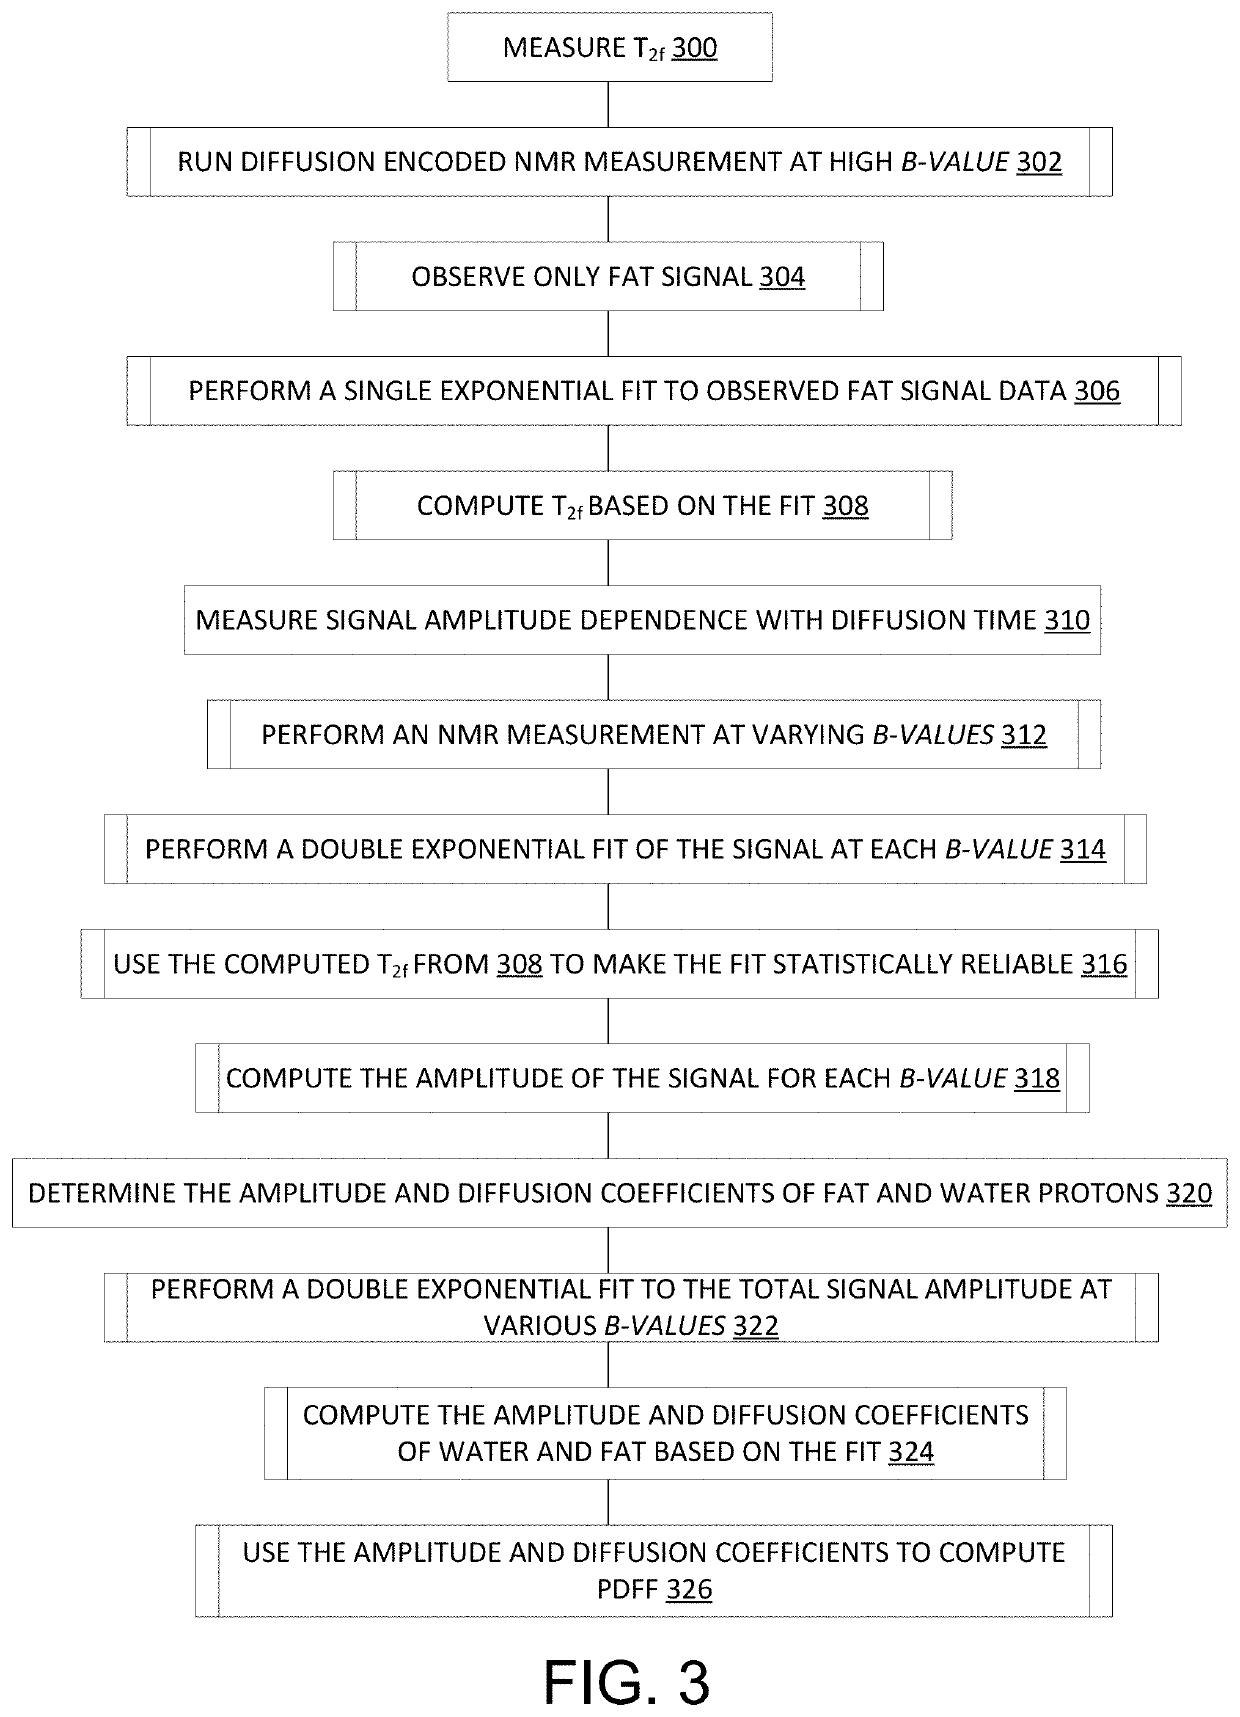 Systems and methods for non-invasive fat composition measurement in an organ